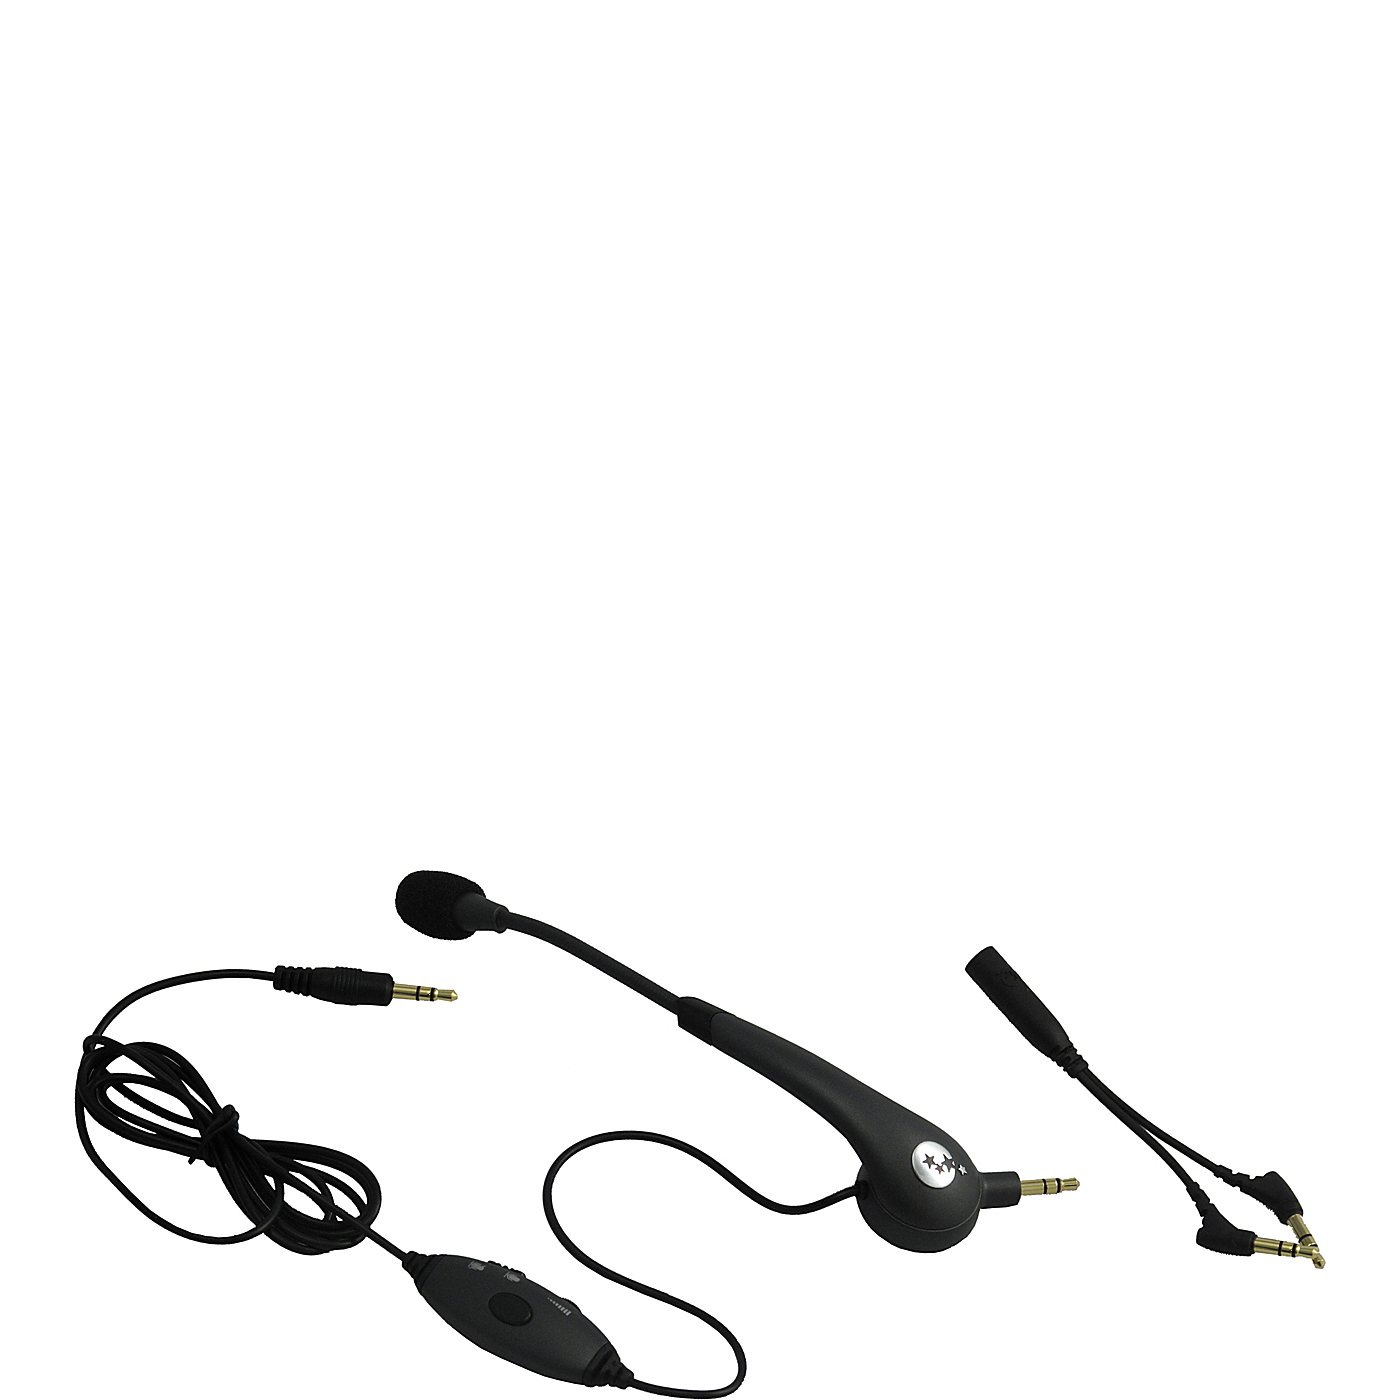 Able Planet Clear Voice LINX Microphone After 20% off $39.99